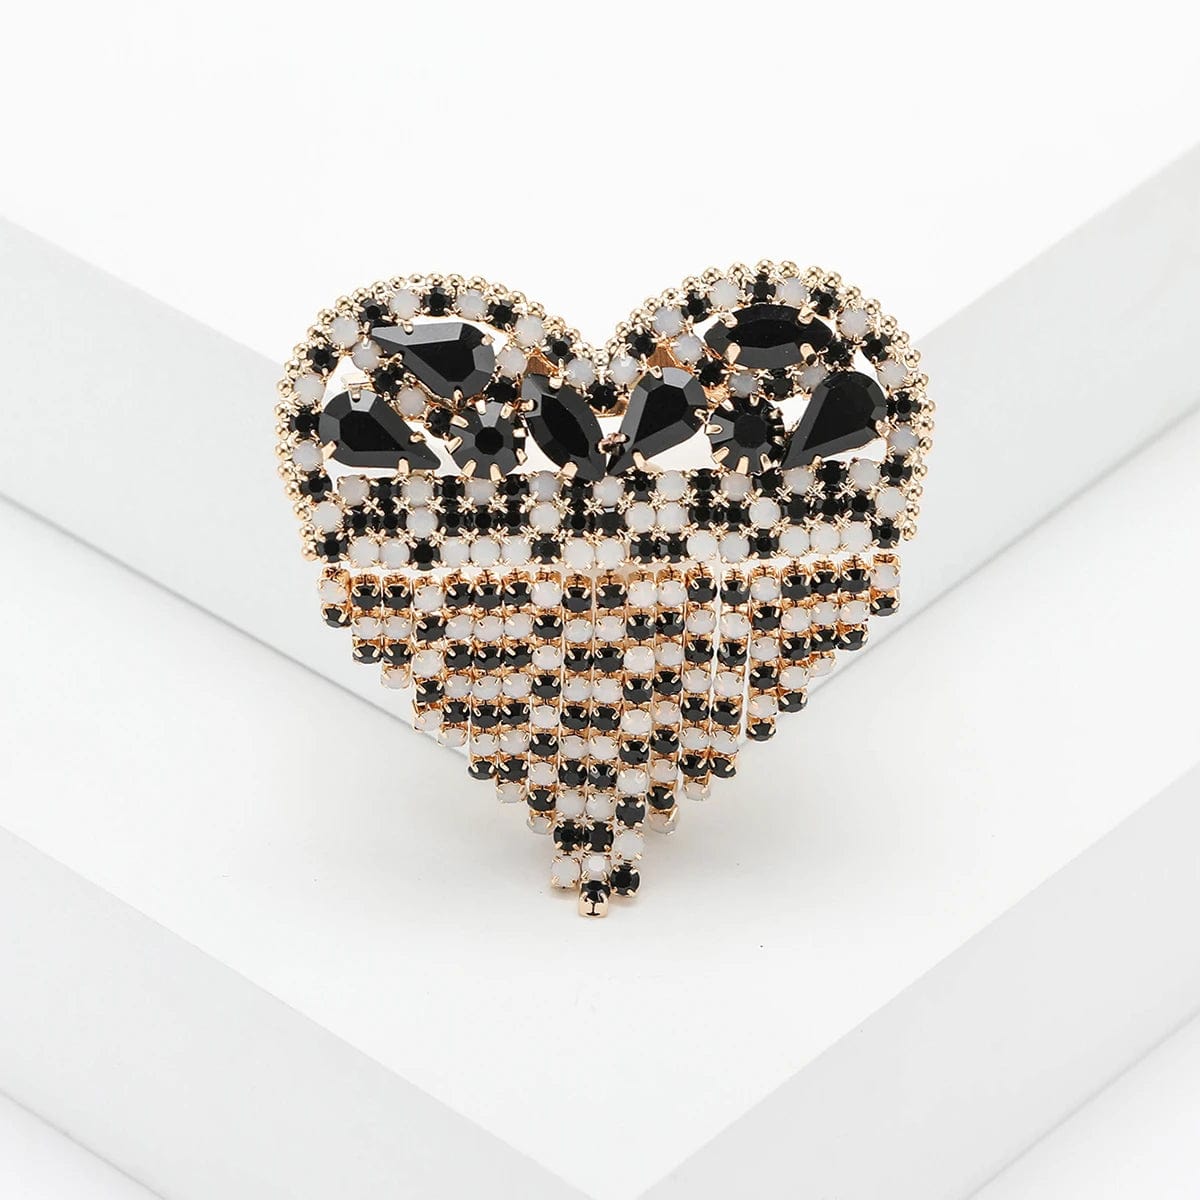 Broche "Coeur Chimbal" femme coeur-passion